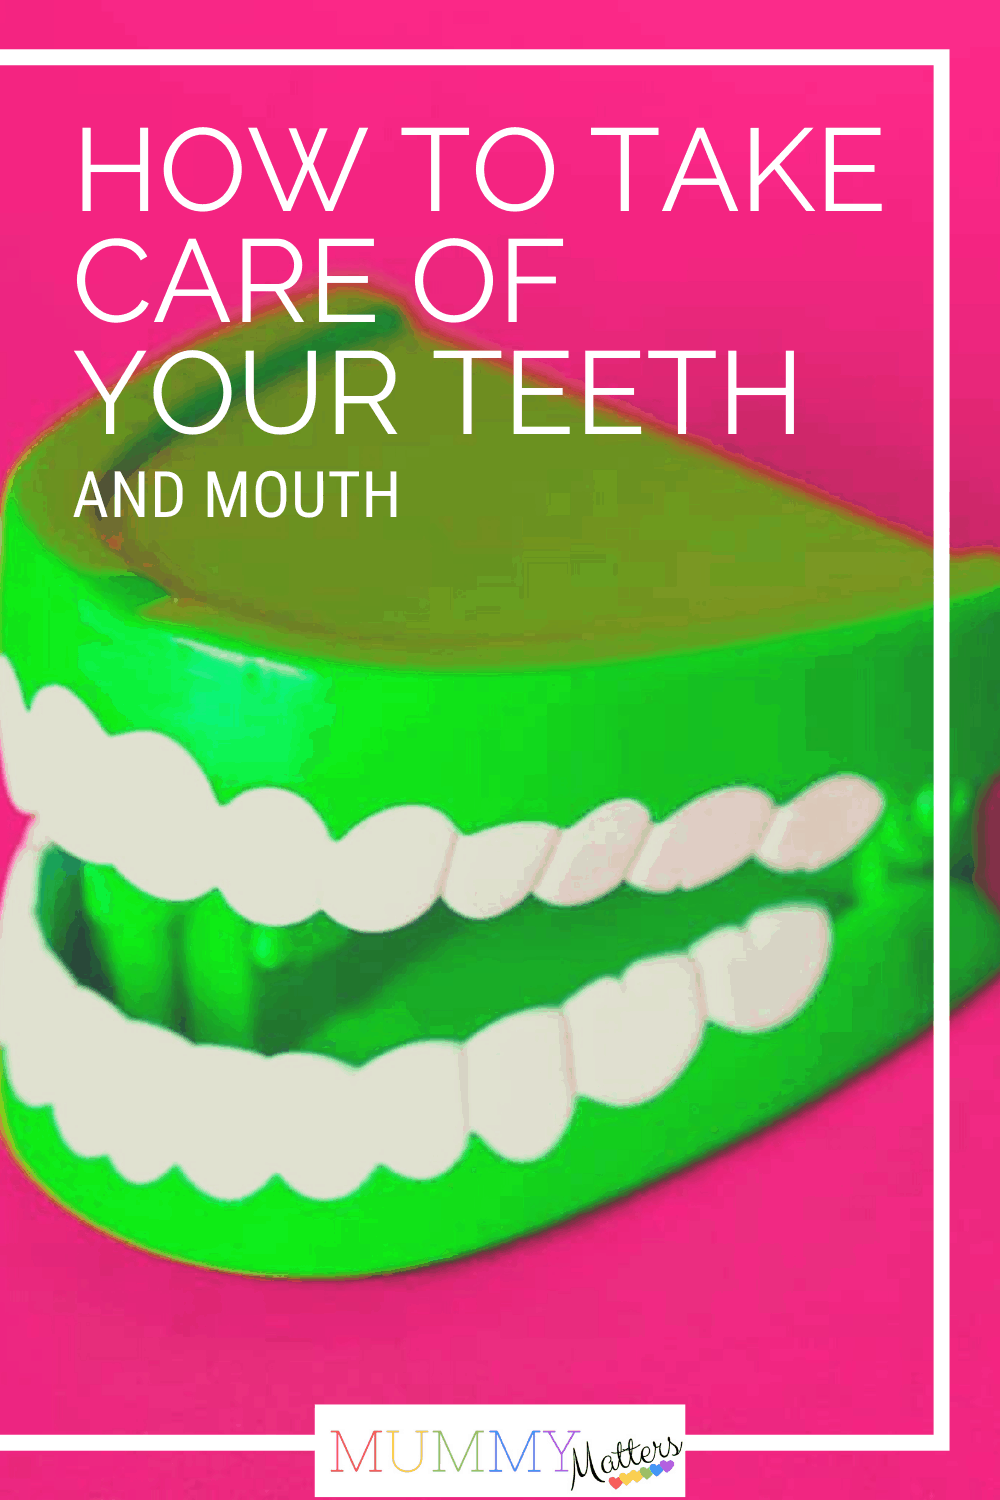 How to take care of your teeth and mouth 1